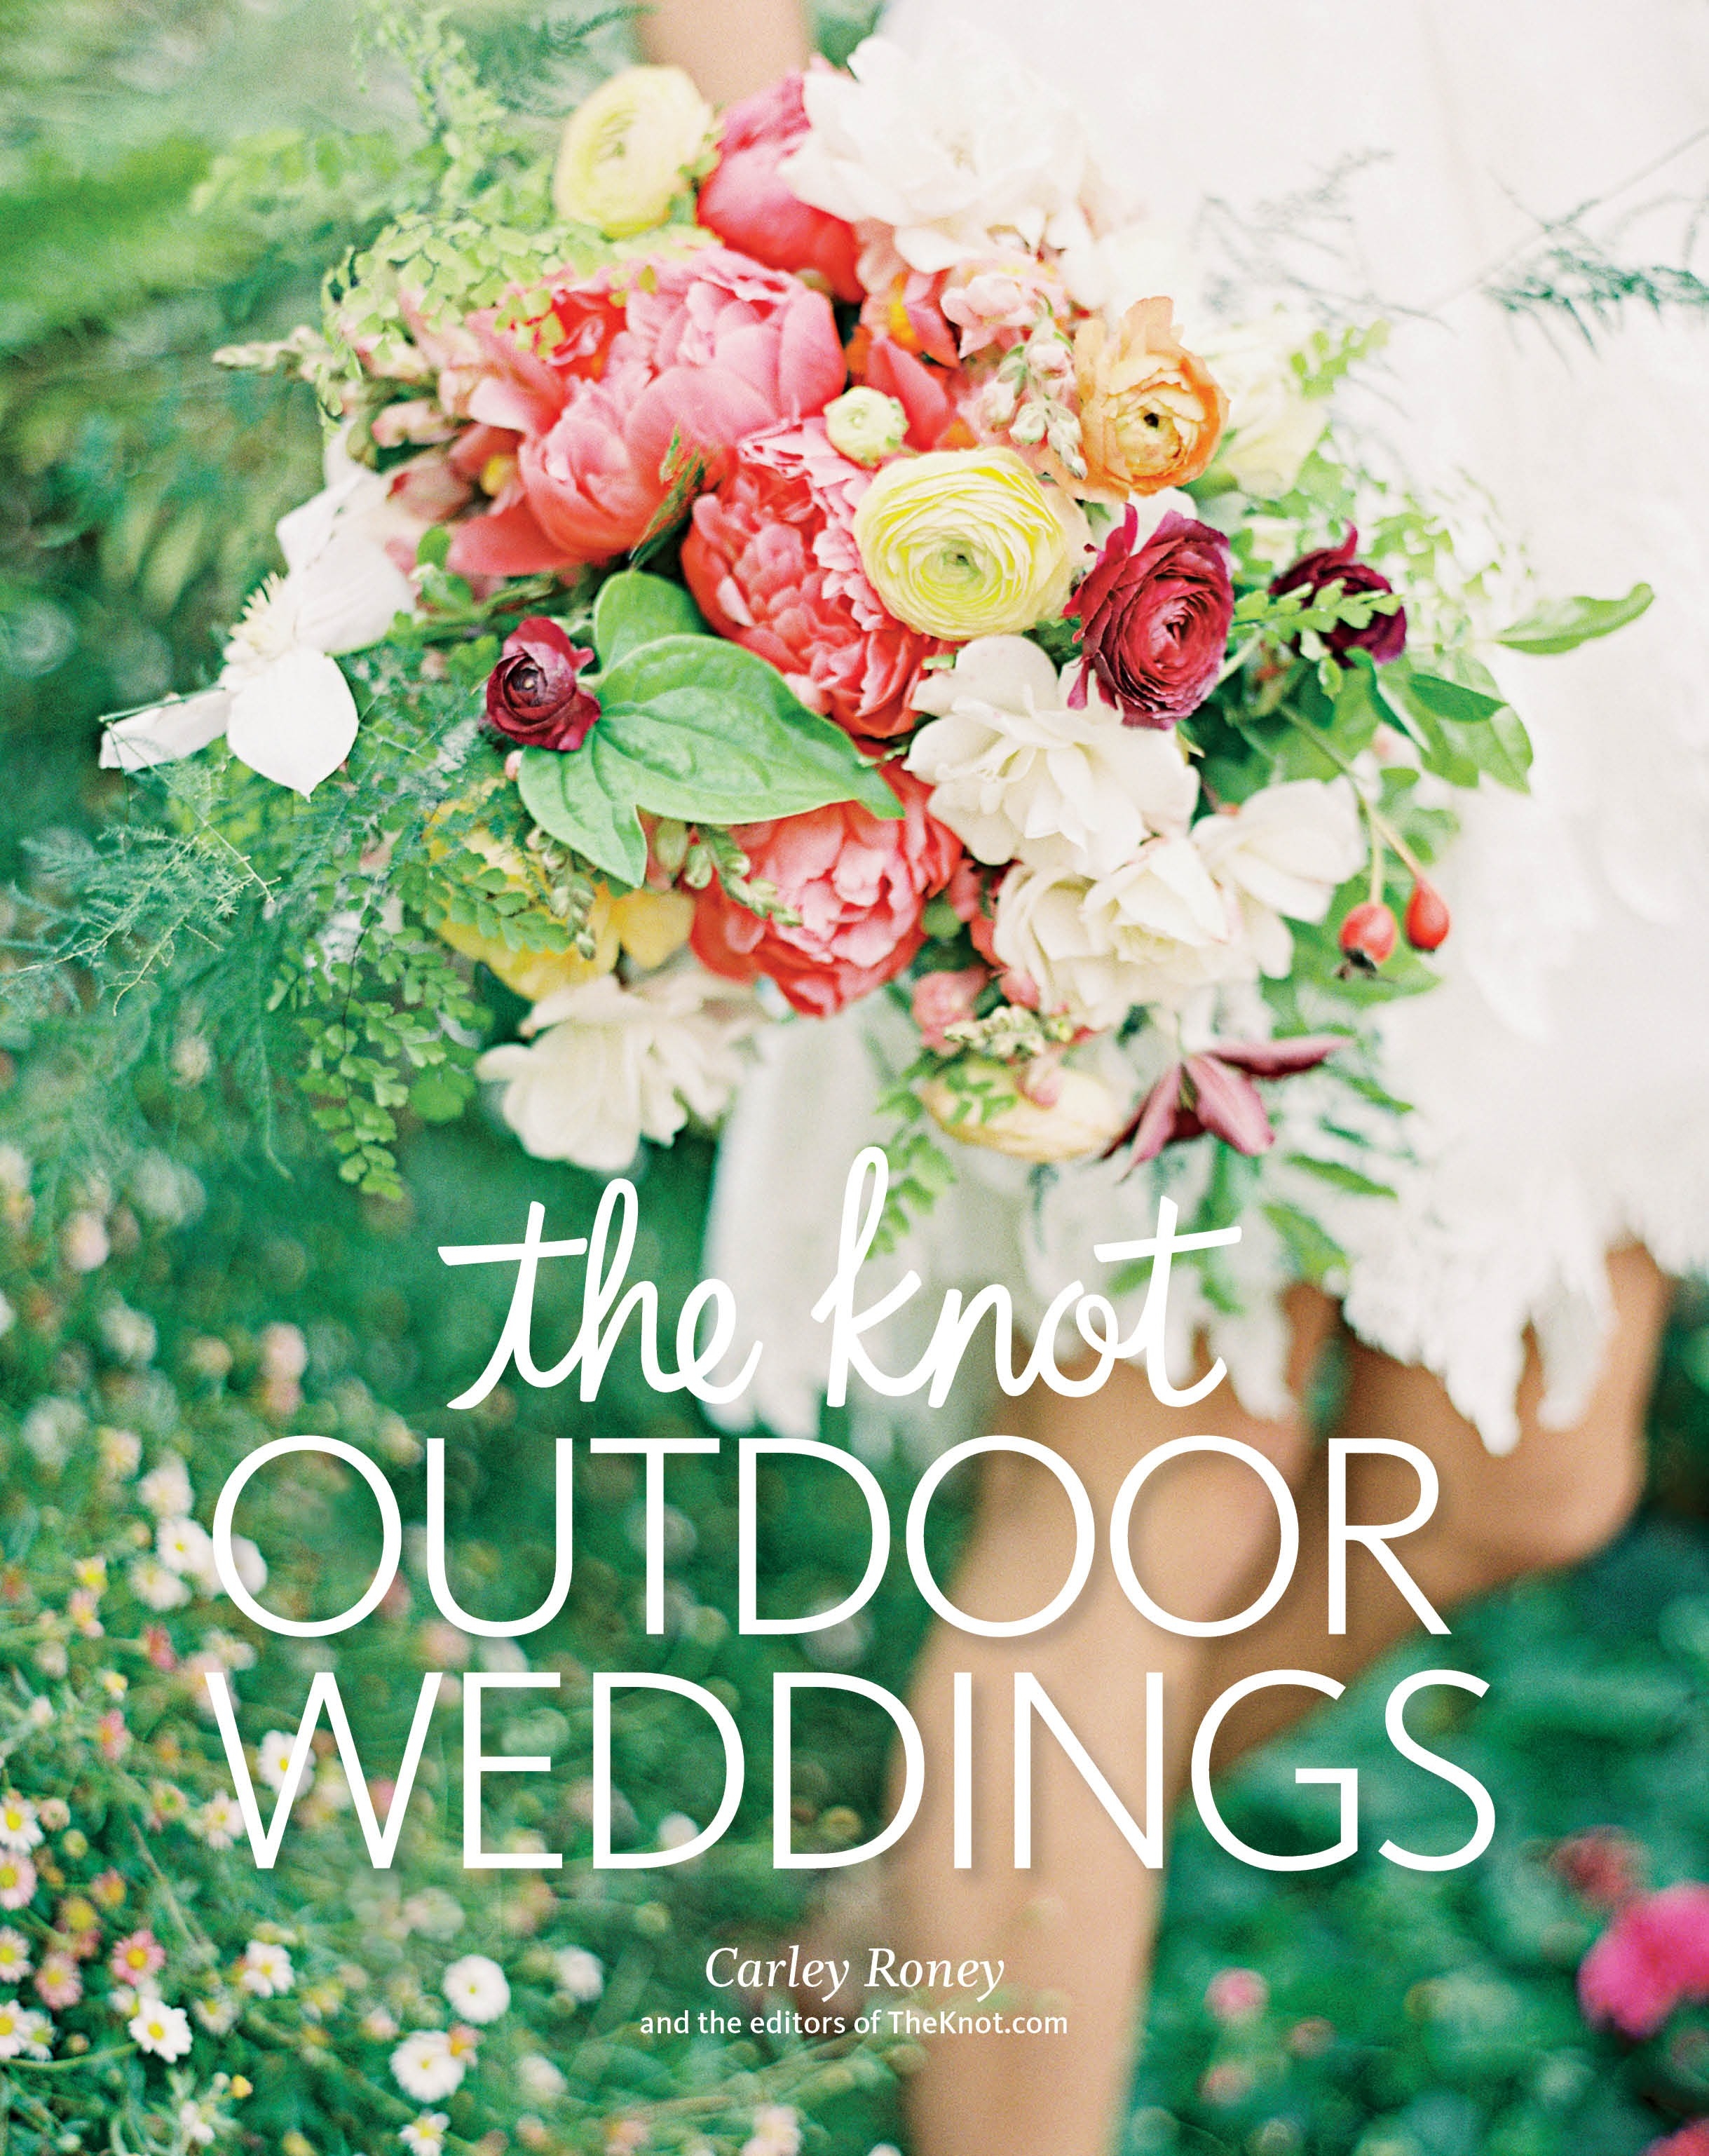 the knot outdoor weddings by carley roney - penguin books australia